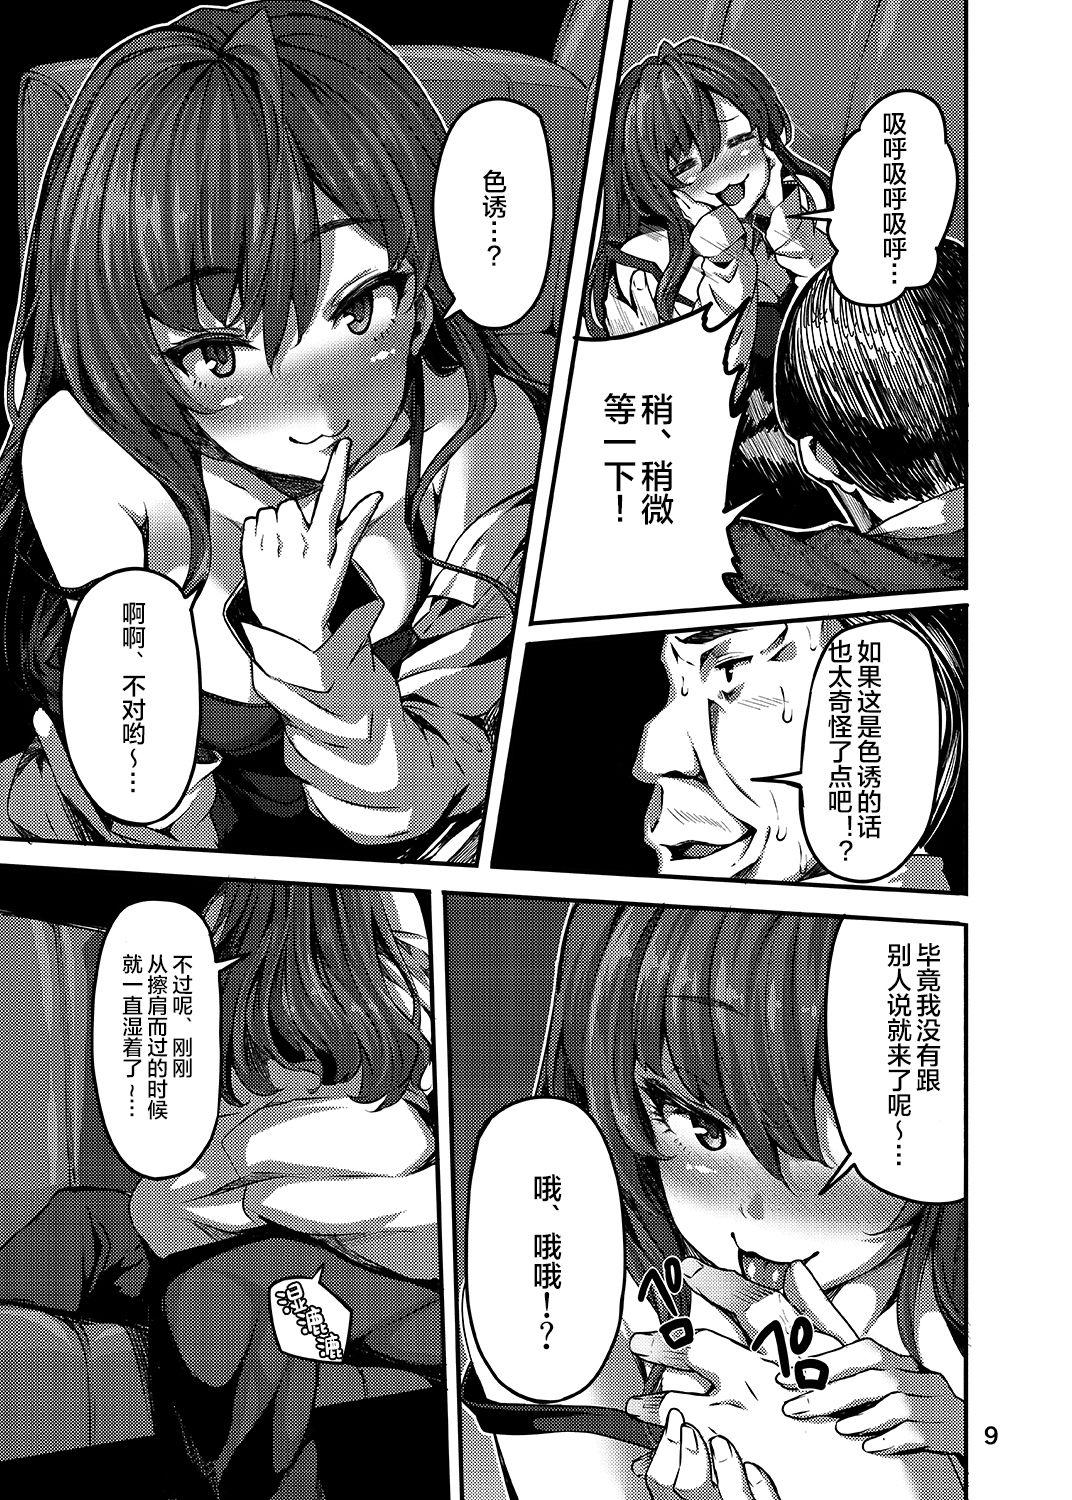 Best Blowjob seduction odor - The idolmaster Coeds - Page 9